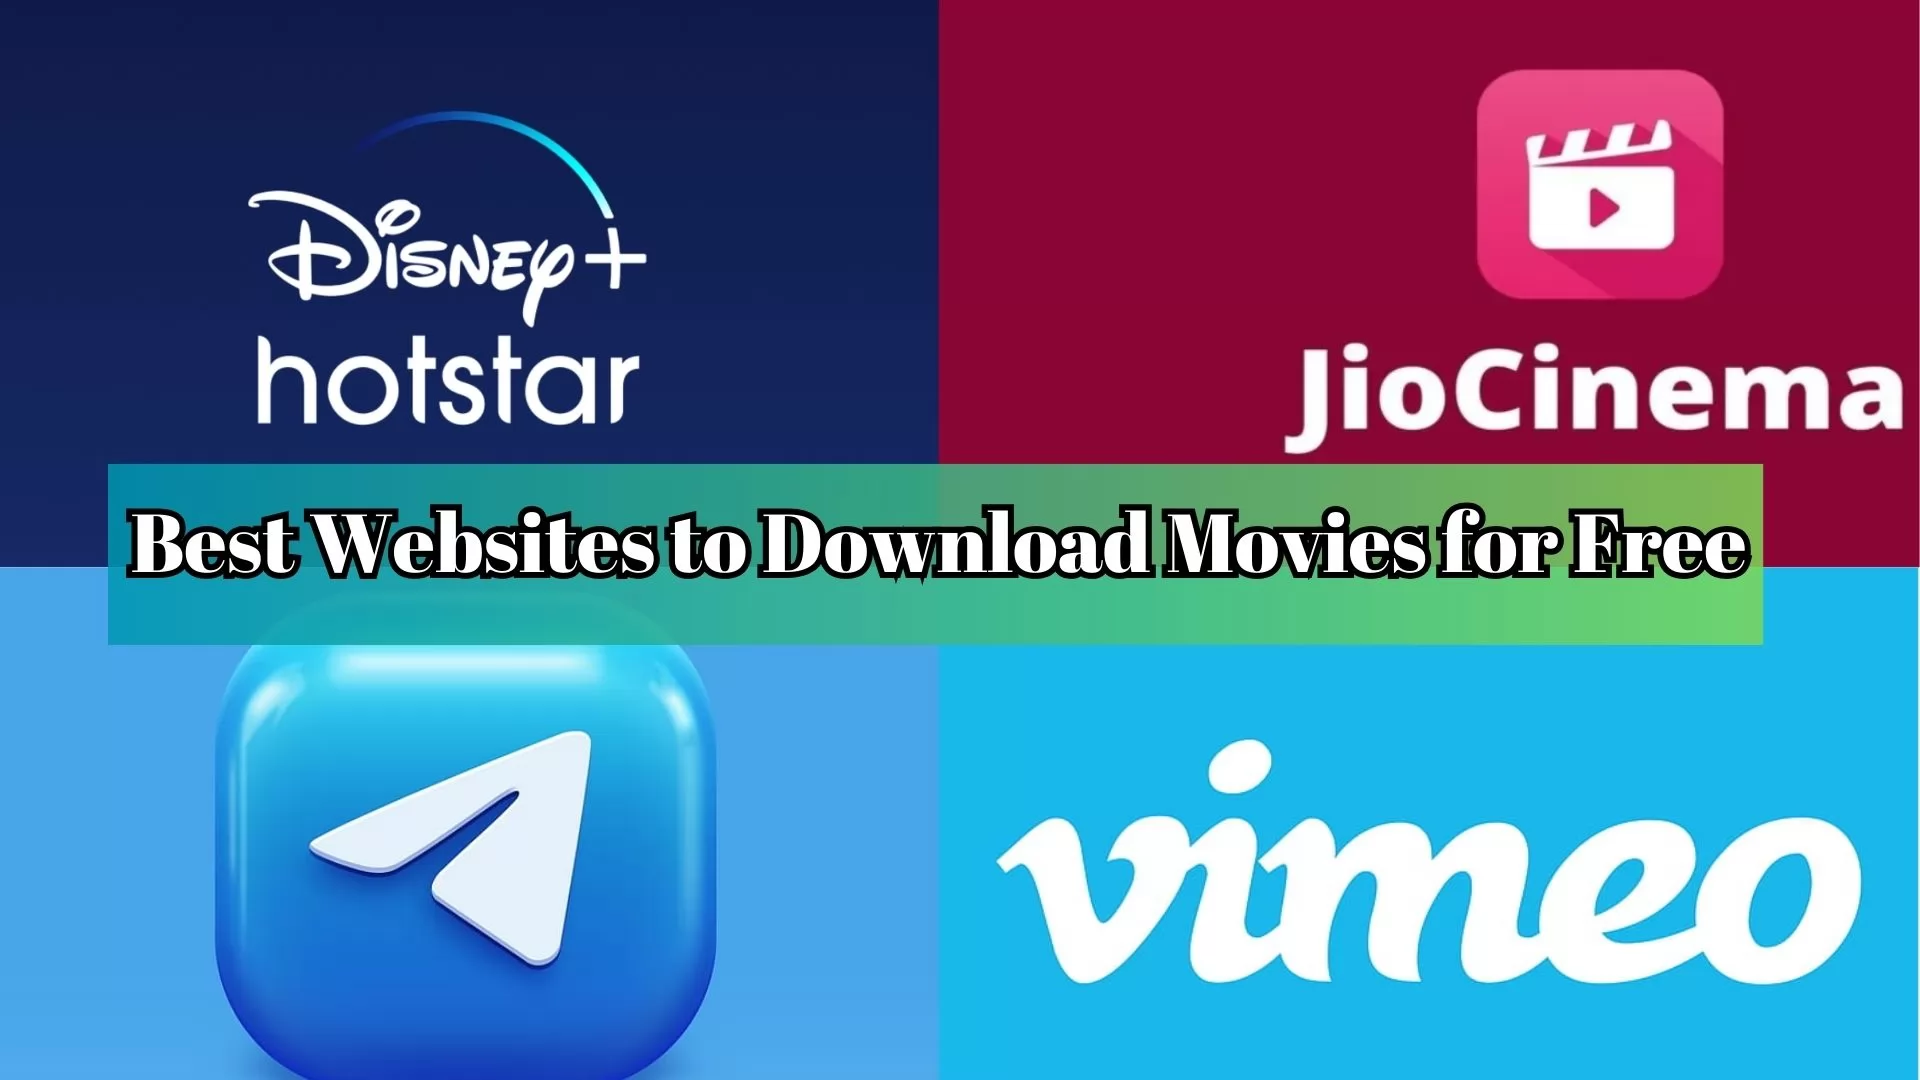 Best Websites to Download Movies for Free